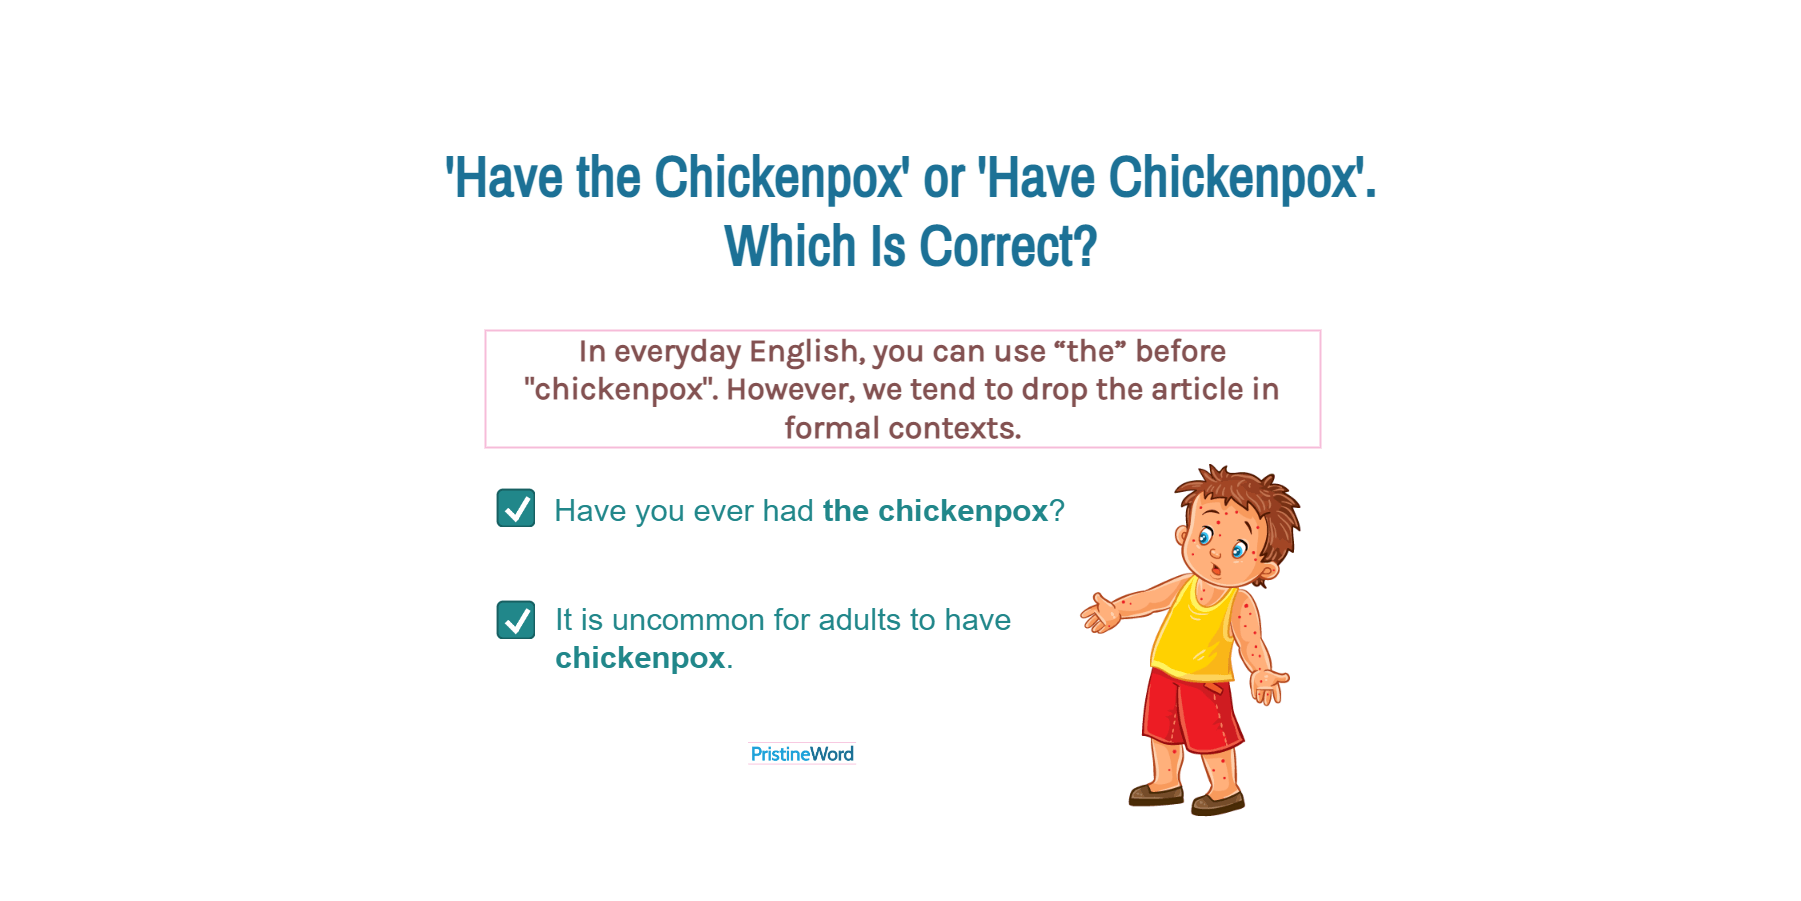 The Chickenpox or Chickenpox. Which Is Correct?